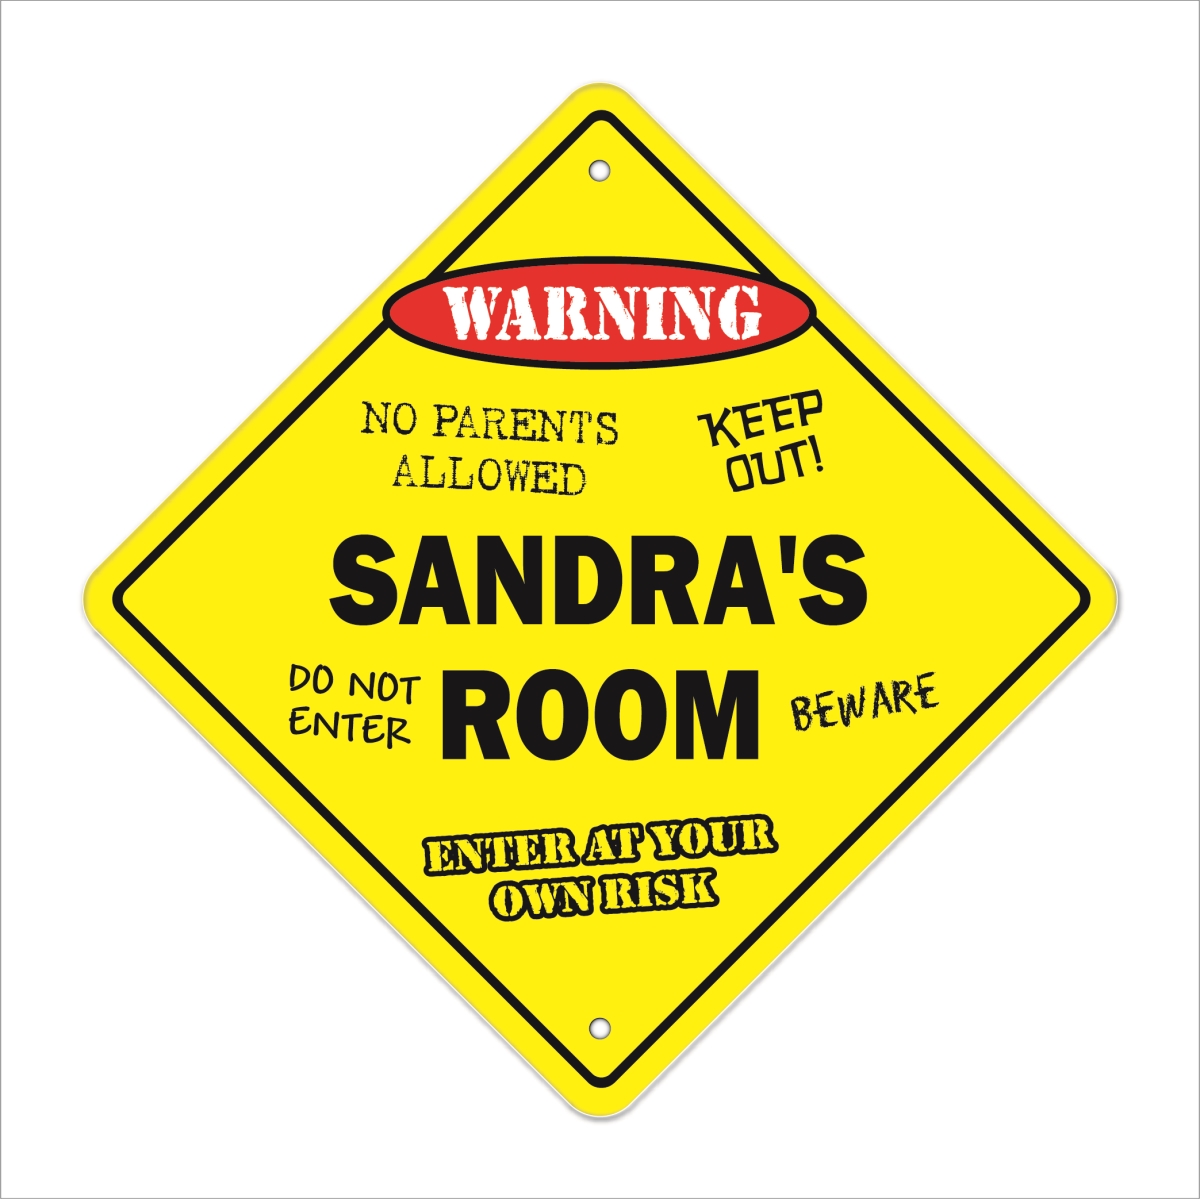 SignMission X-Sandras Room 12 x 12 in. Crossing Zone Xing Room Sign - Sandras